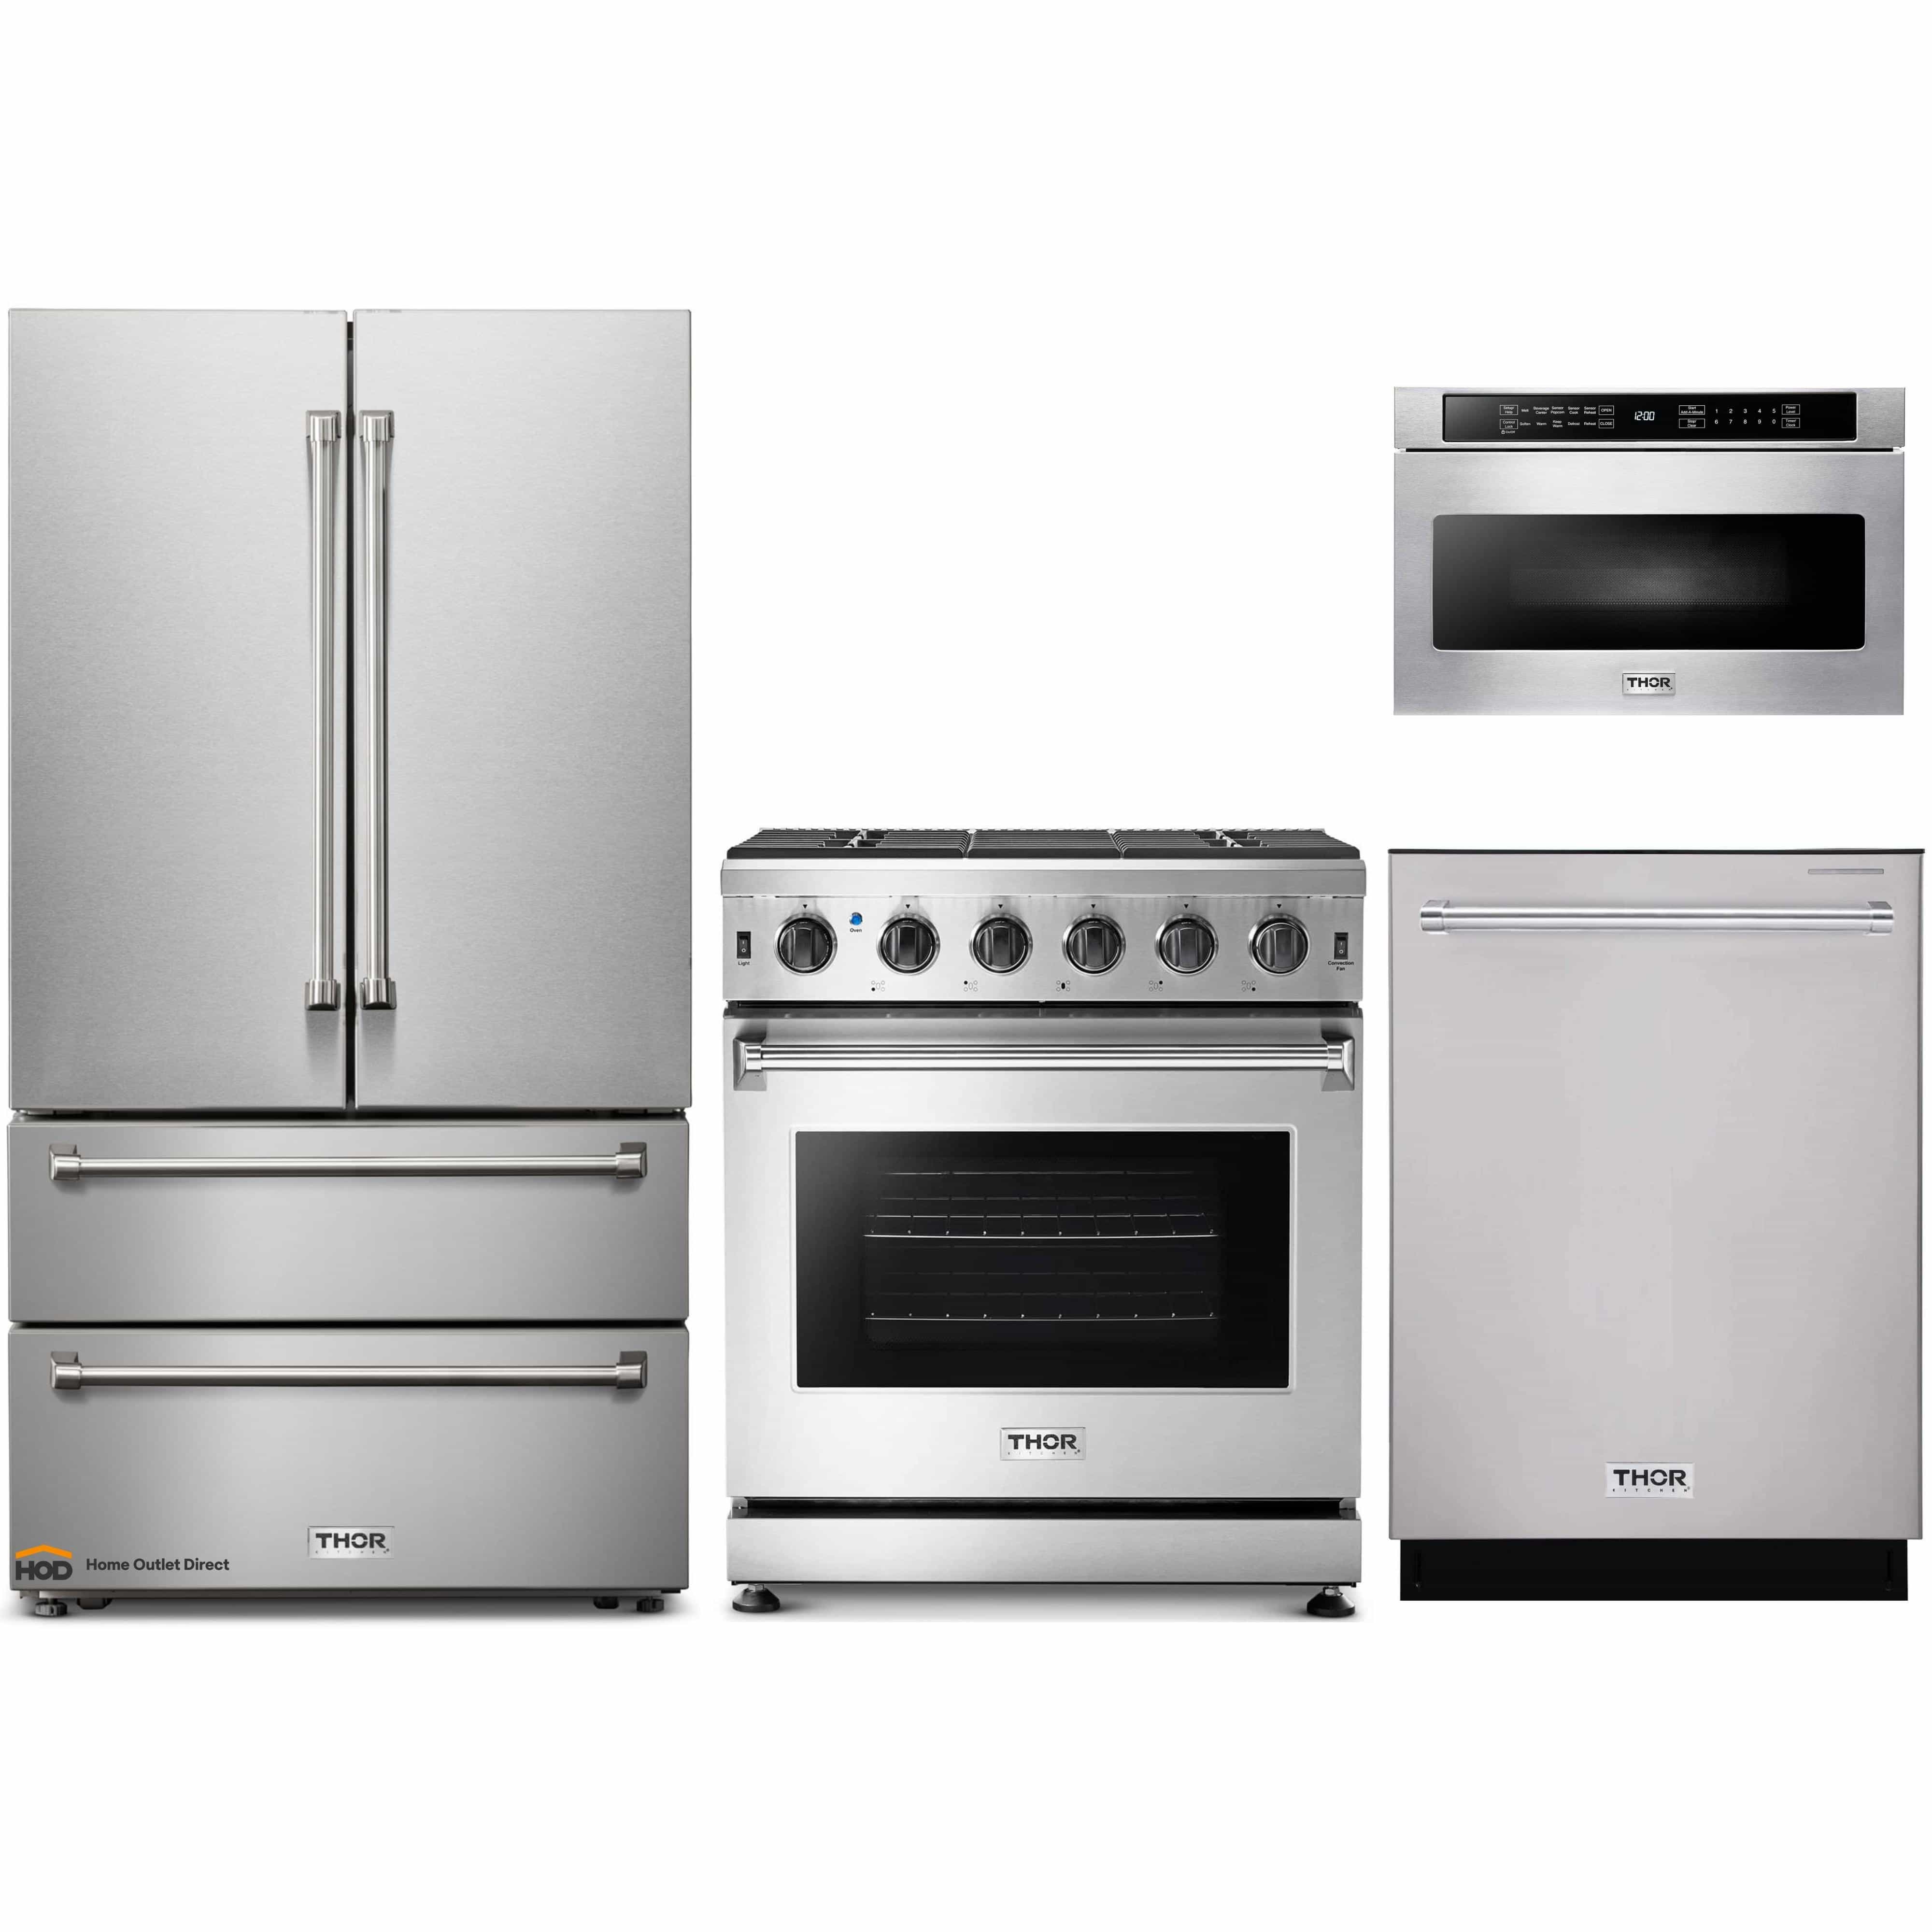 Thor Kitchen 4-Piece Appliance Package - 30-Inch Gas Range, French Door Refrigerator, Dishwasher, and Microwave Drawer in Stainless Steel